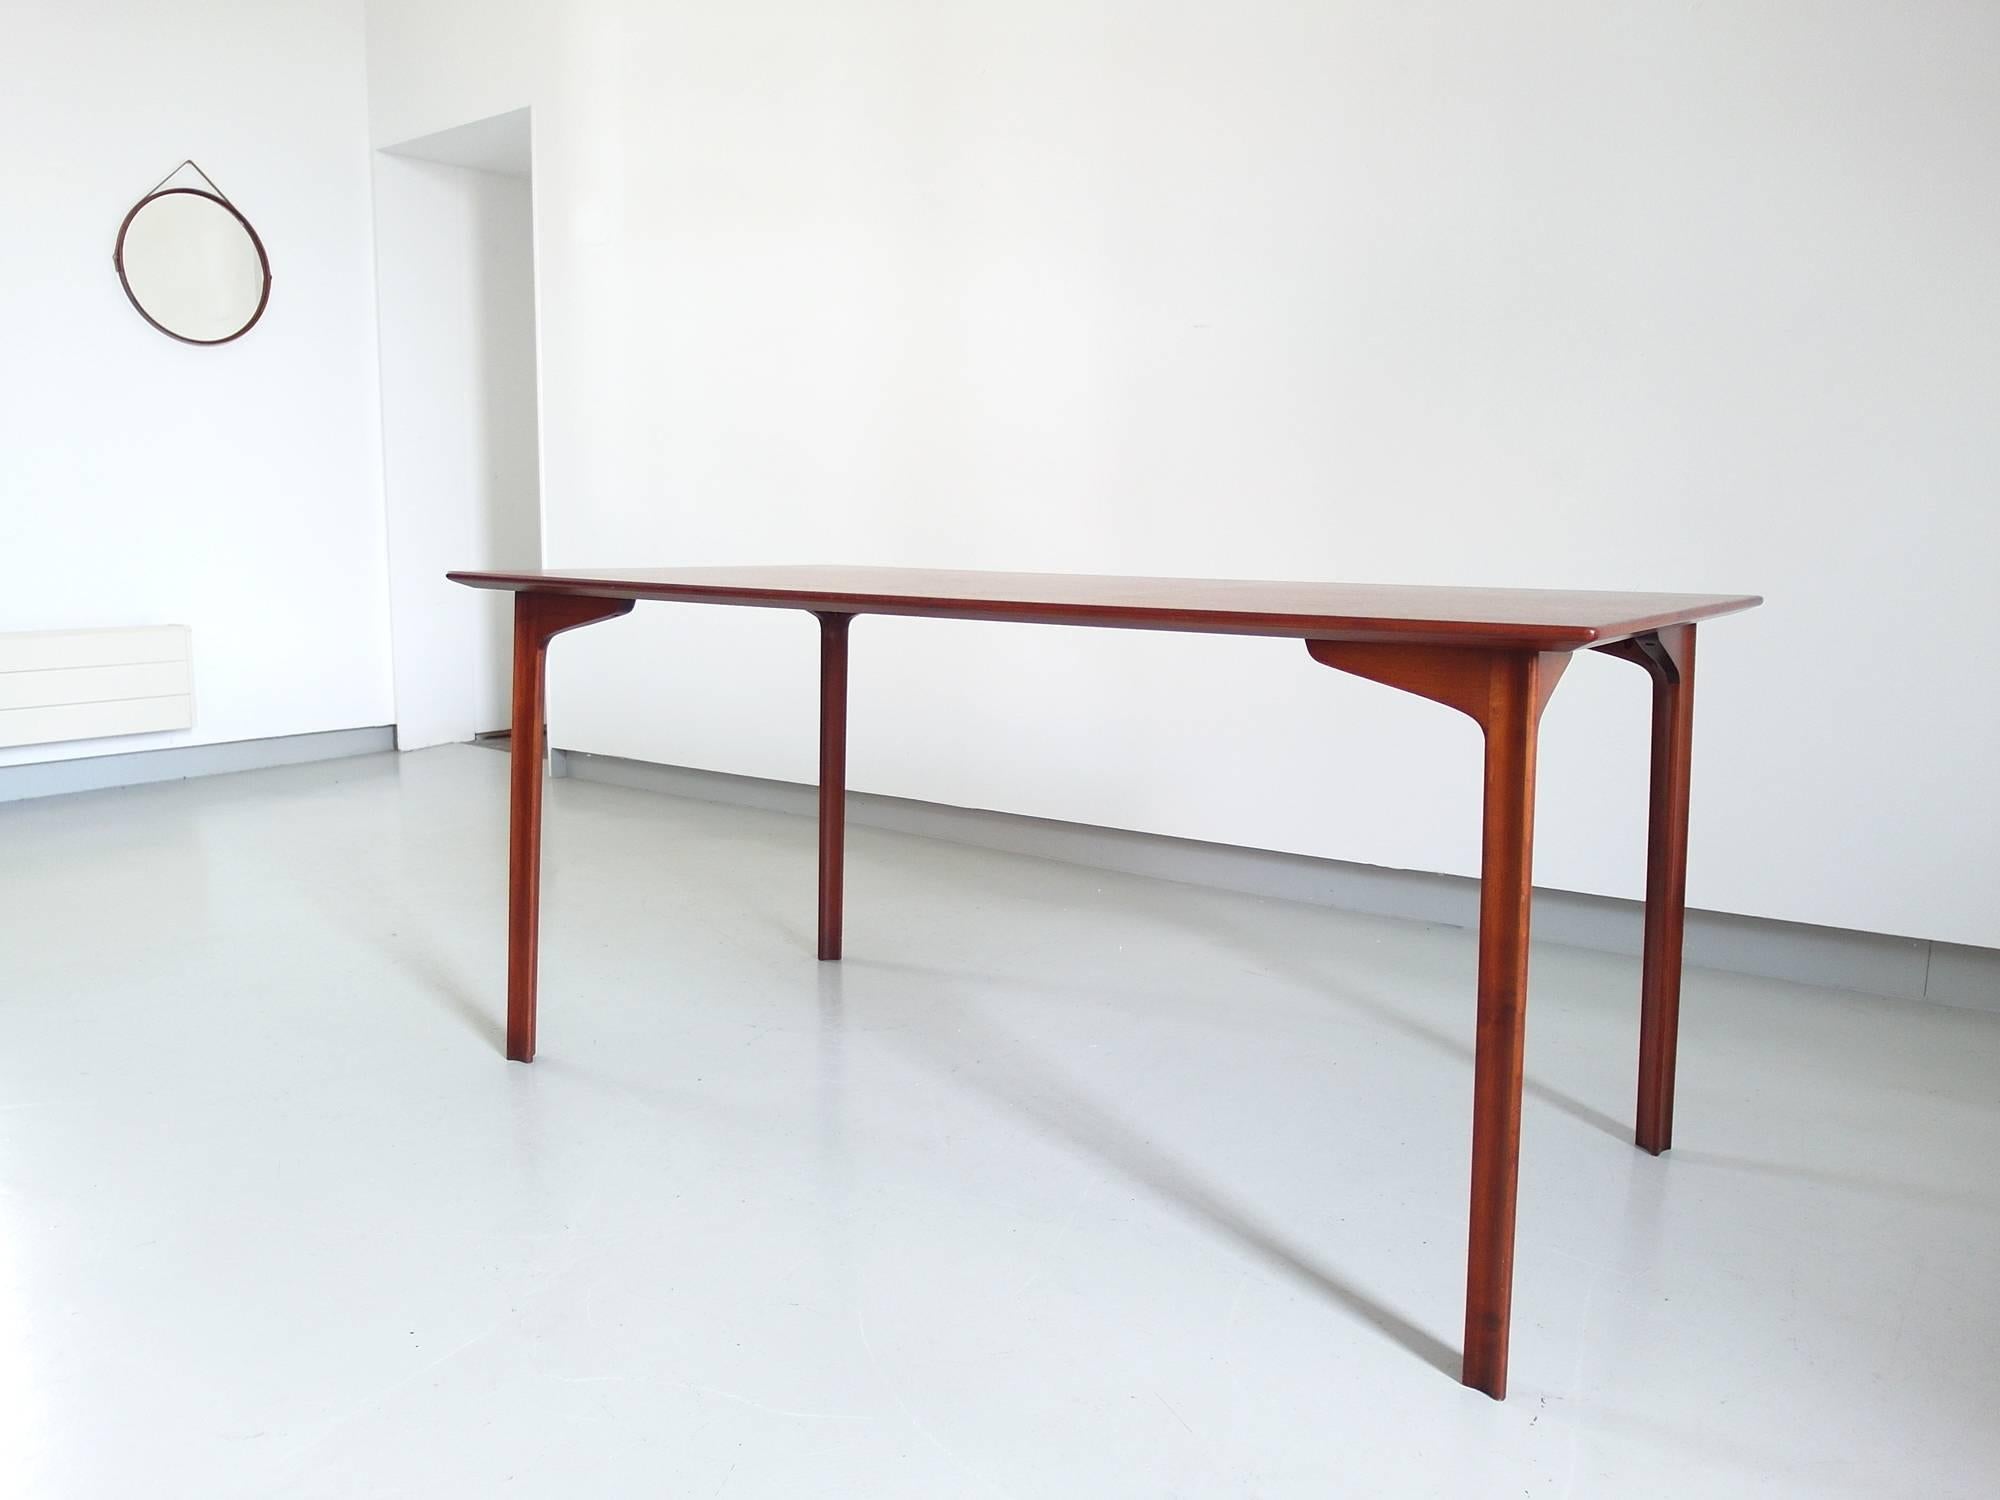 Grand Prix teak dining table designed by Arne Jacobsen in 1960. Produced by Fritz Hansen. This rare table was designed to be the companion for the Grand Prix chairs.
The table is called the Grand Prix table, after the model 3130 chair that won the